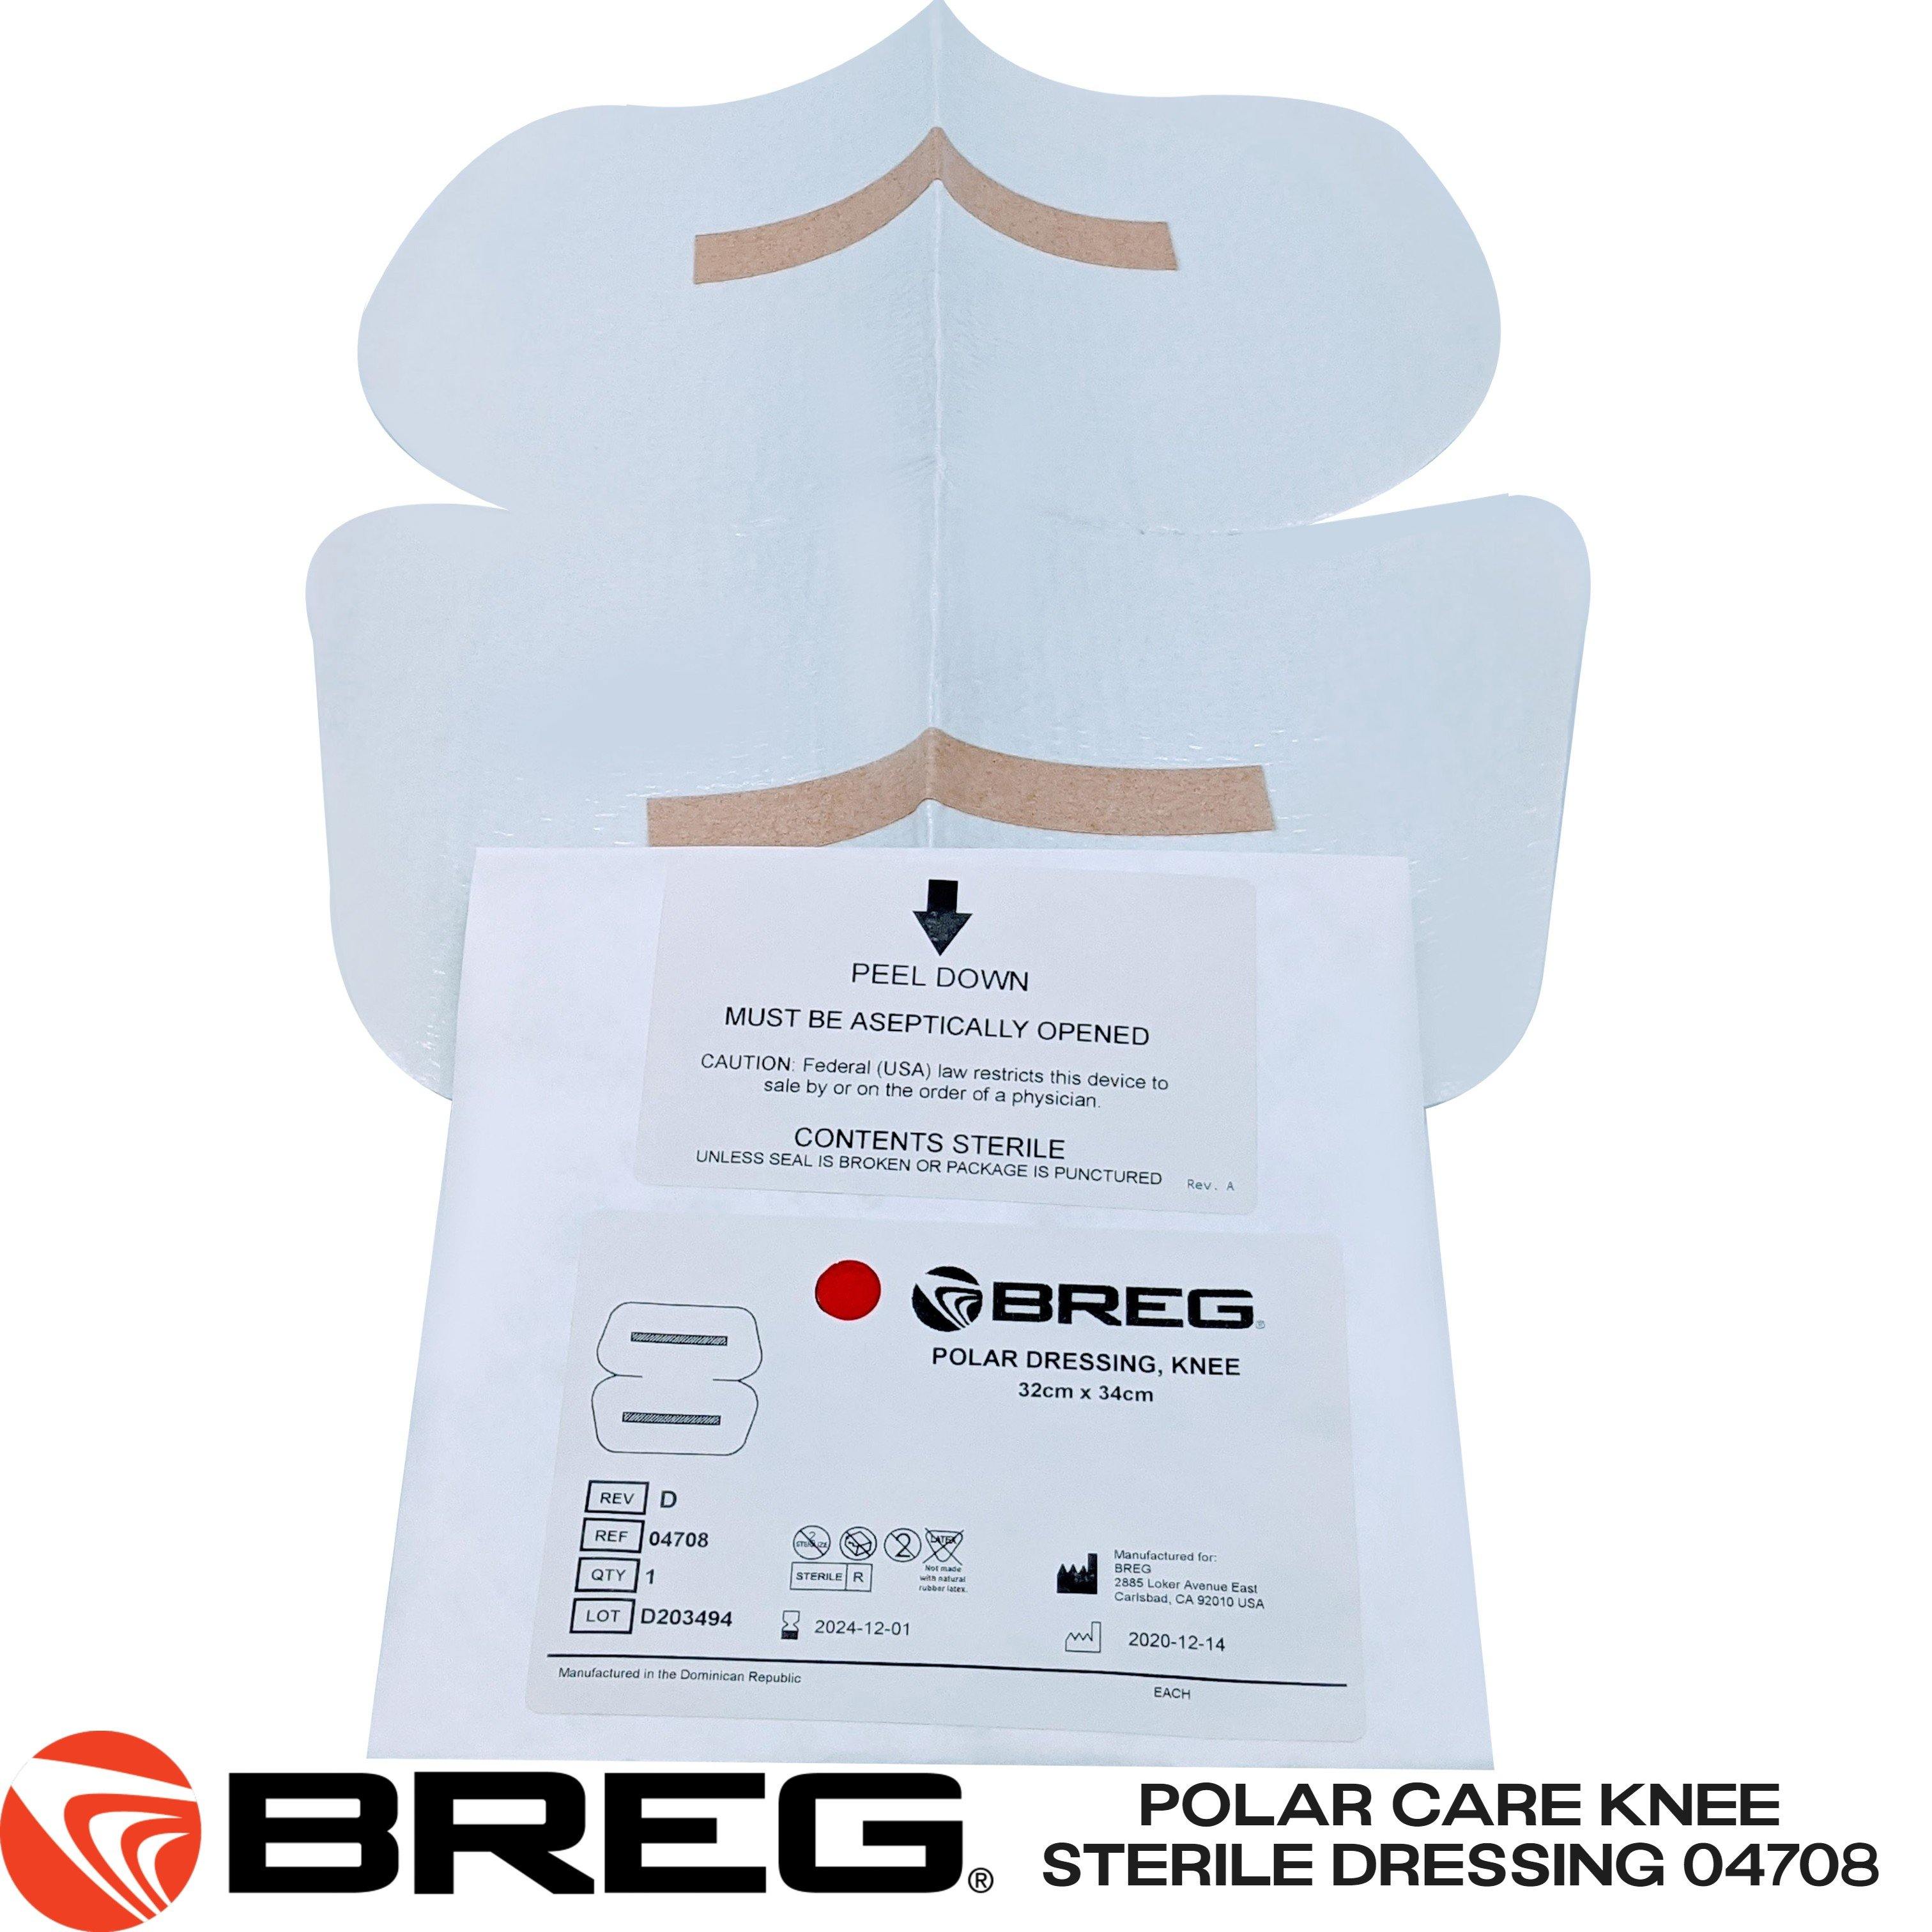 Breg® Polar Care Cube & Glacier Sterile Dressings - 04708 Breg® Polar Care Cube & Glacier Sterile Dressings - undefined by Supply Physical Therapy Accessories, Breg, Breg Accessories, Cube, Cube Accessories, Glacier, Glacier Accessories, Replacement, Sterile, Wraps